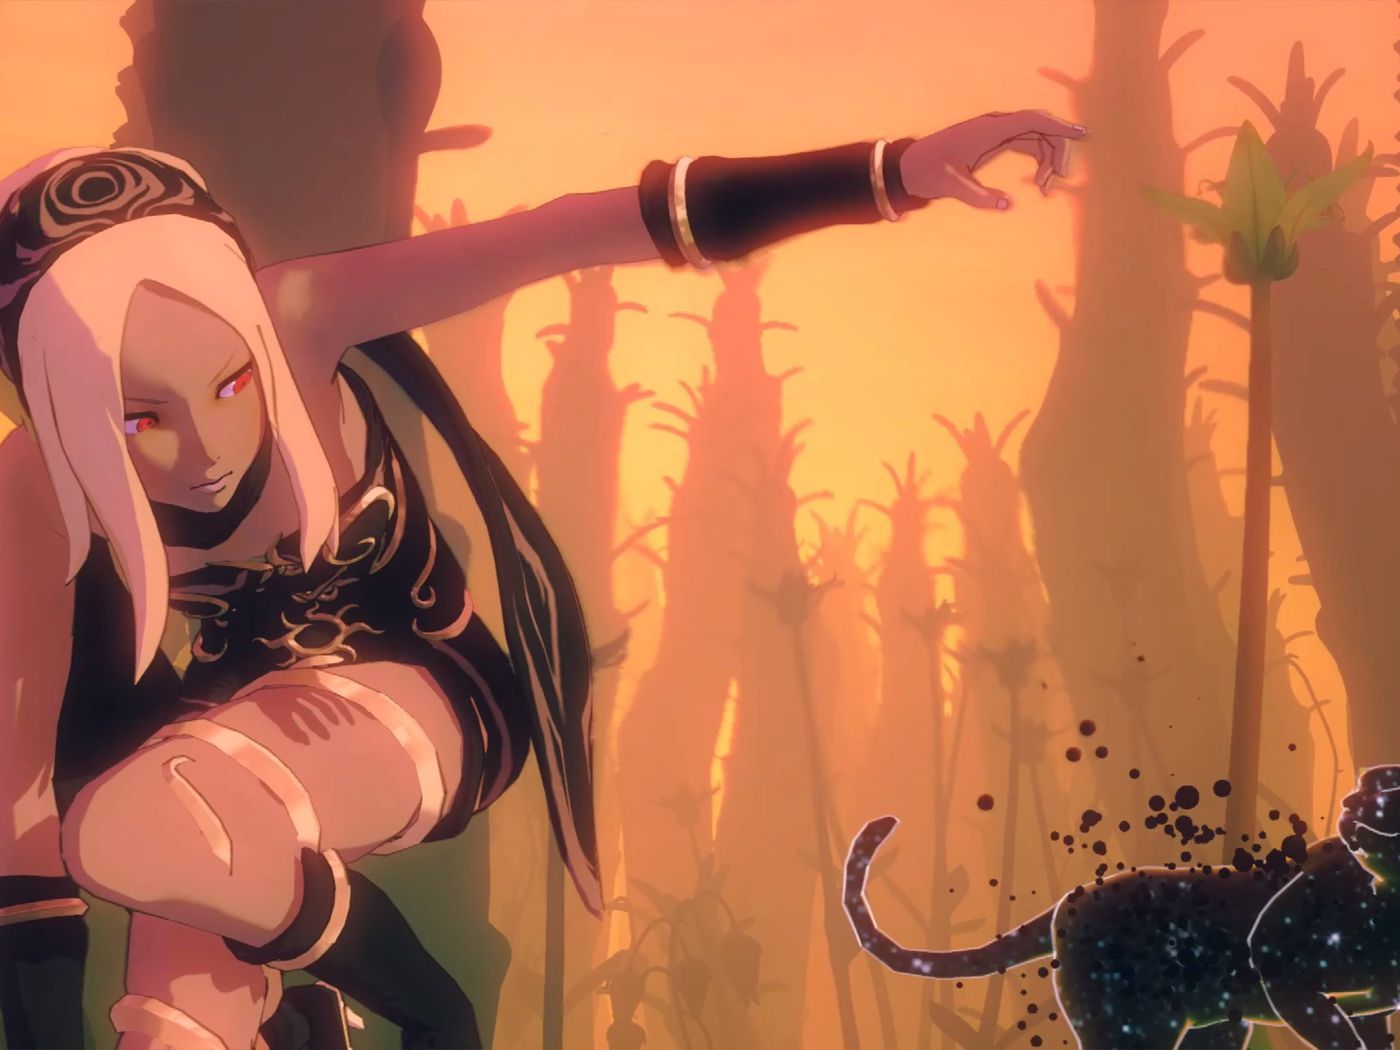 Gravity Rush 2 is 2017's first excellent game